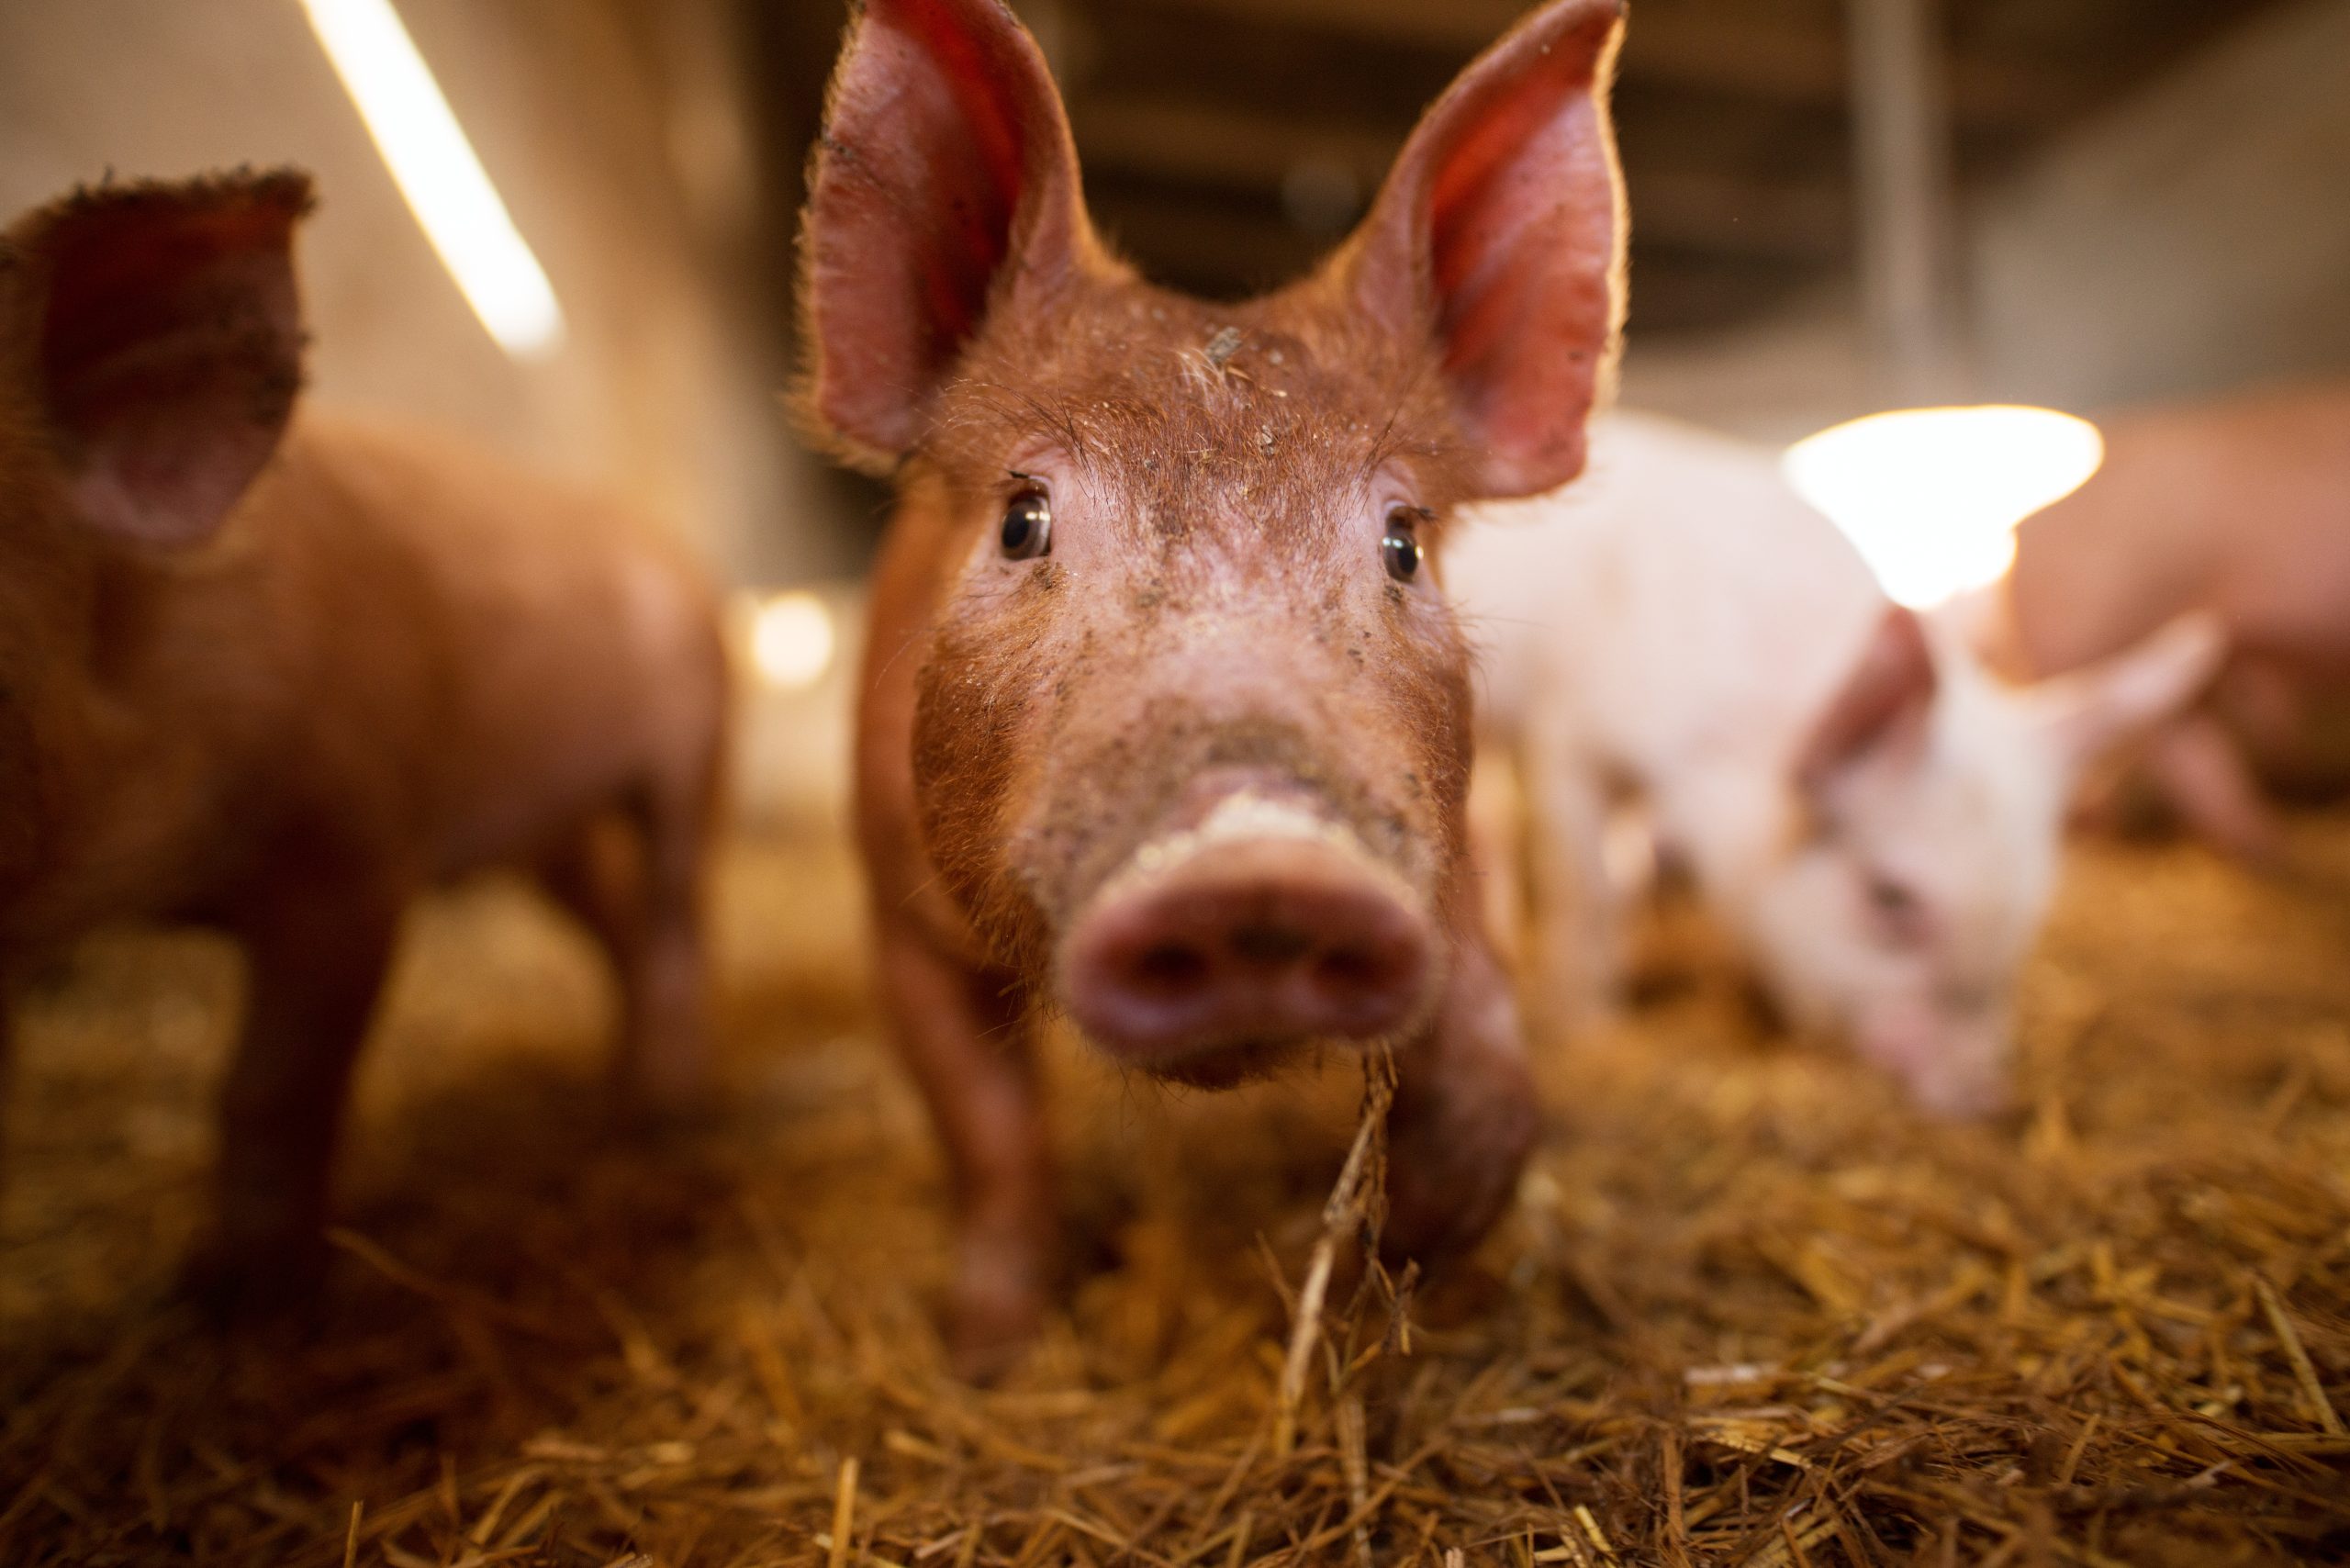 A small piglet in the farm. Swine in a stall. Shallow depth of field portrait of young pig in the farm.